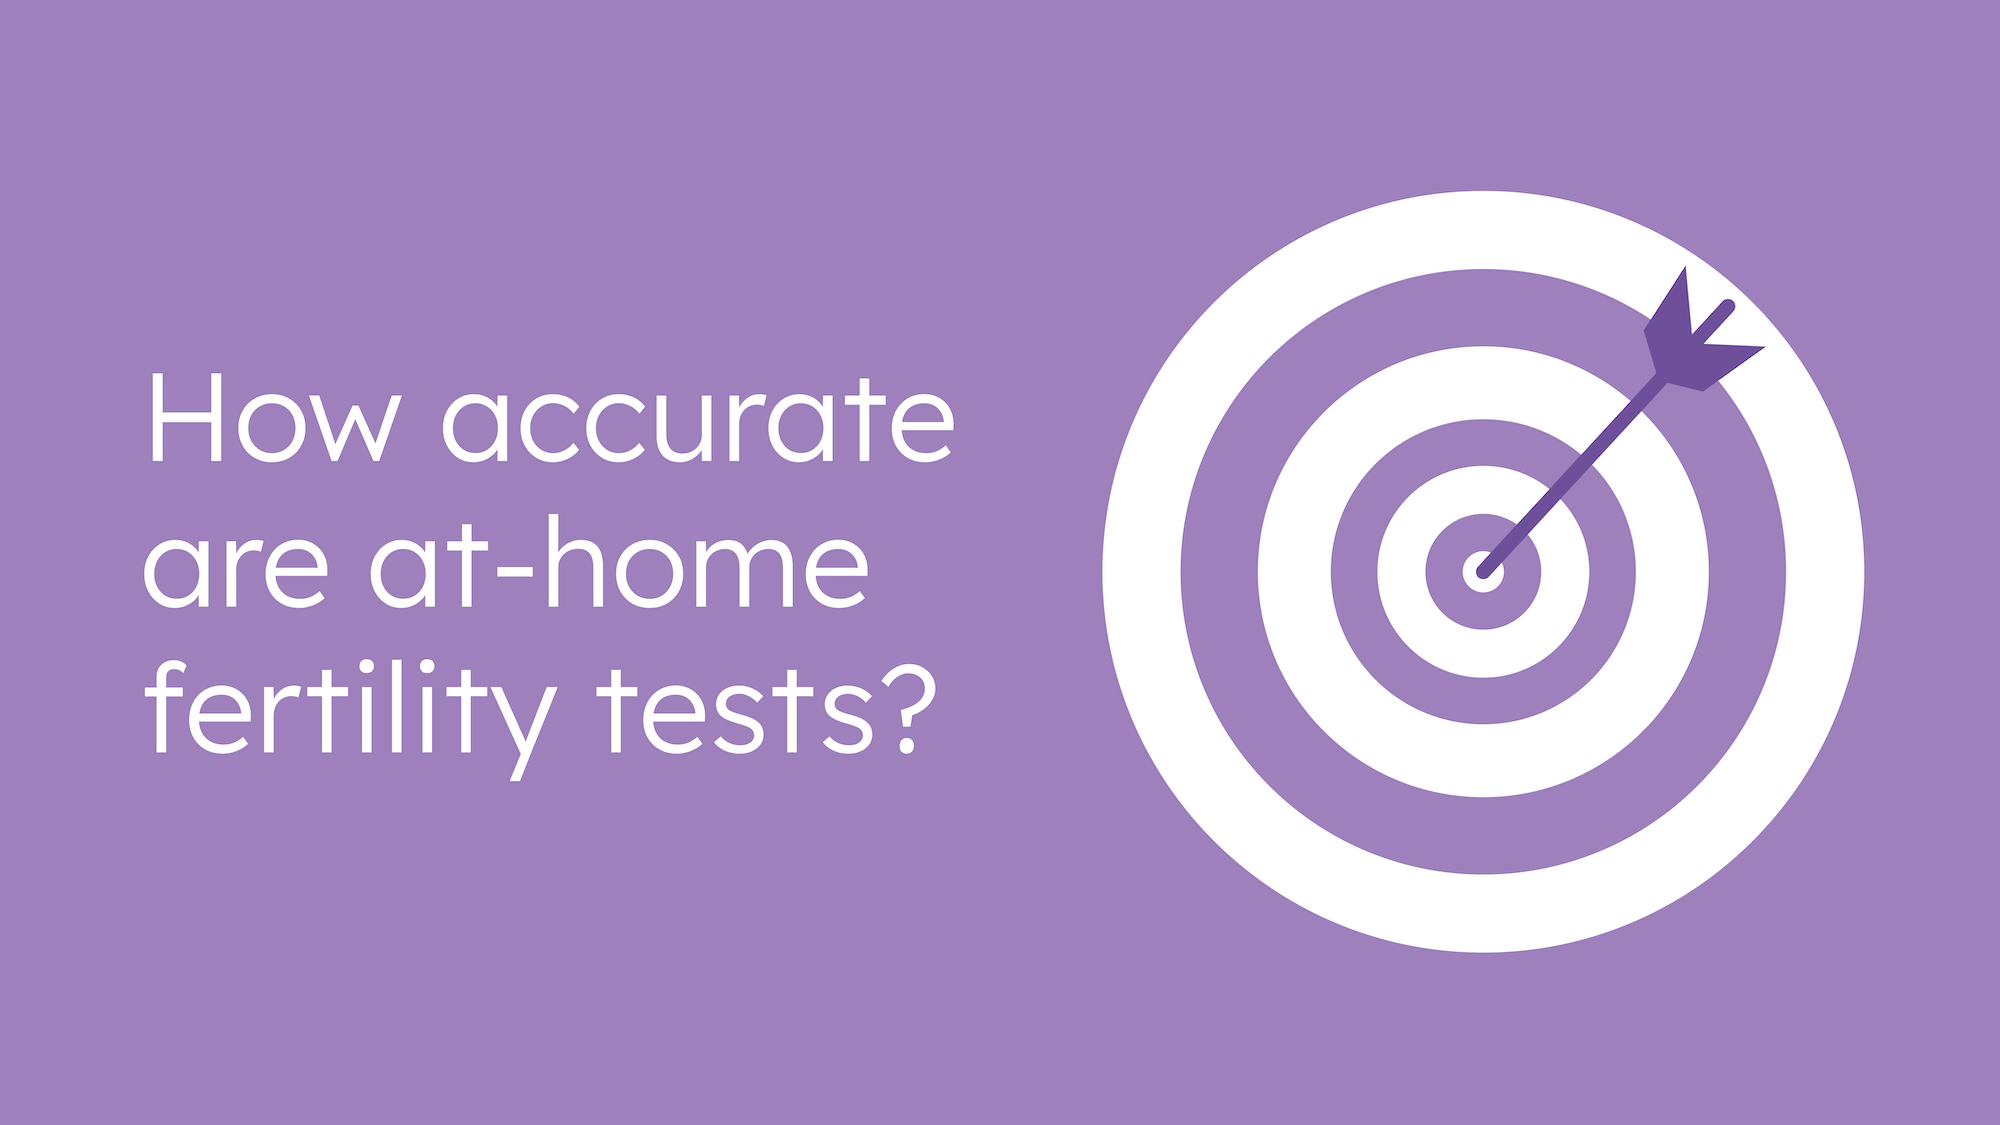 how accurate are at-home fertility tests?